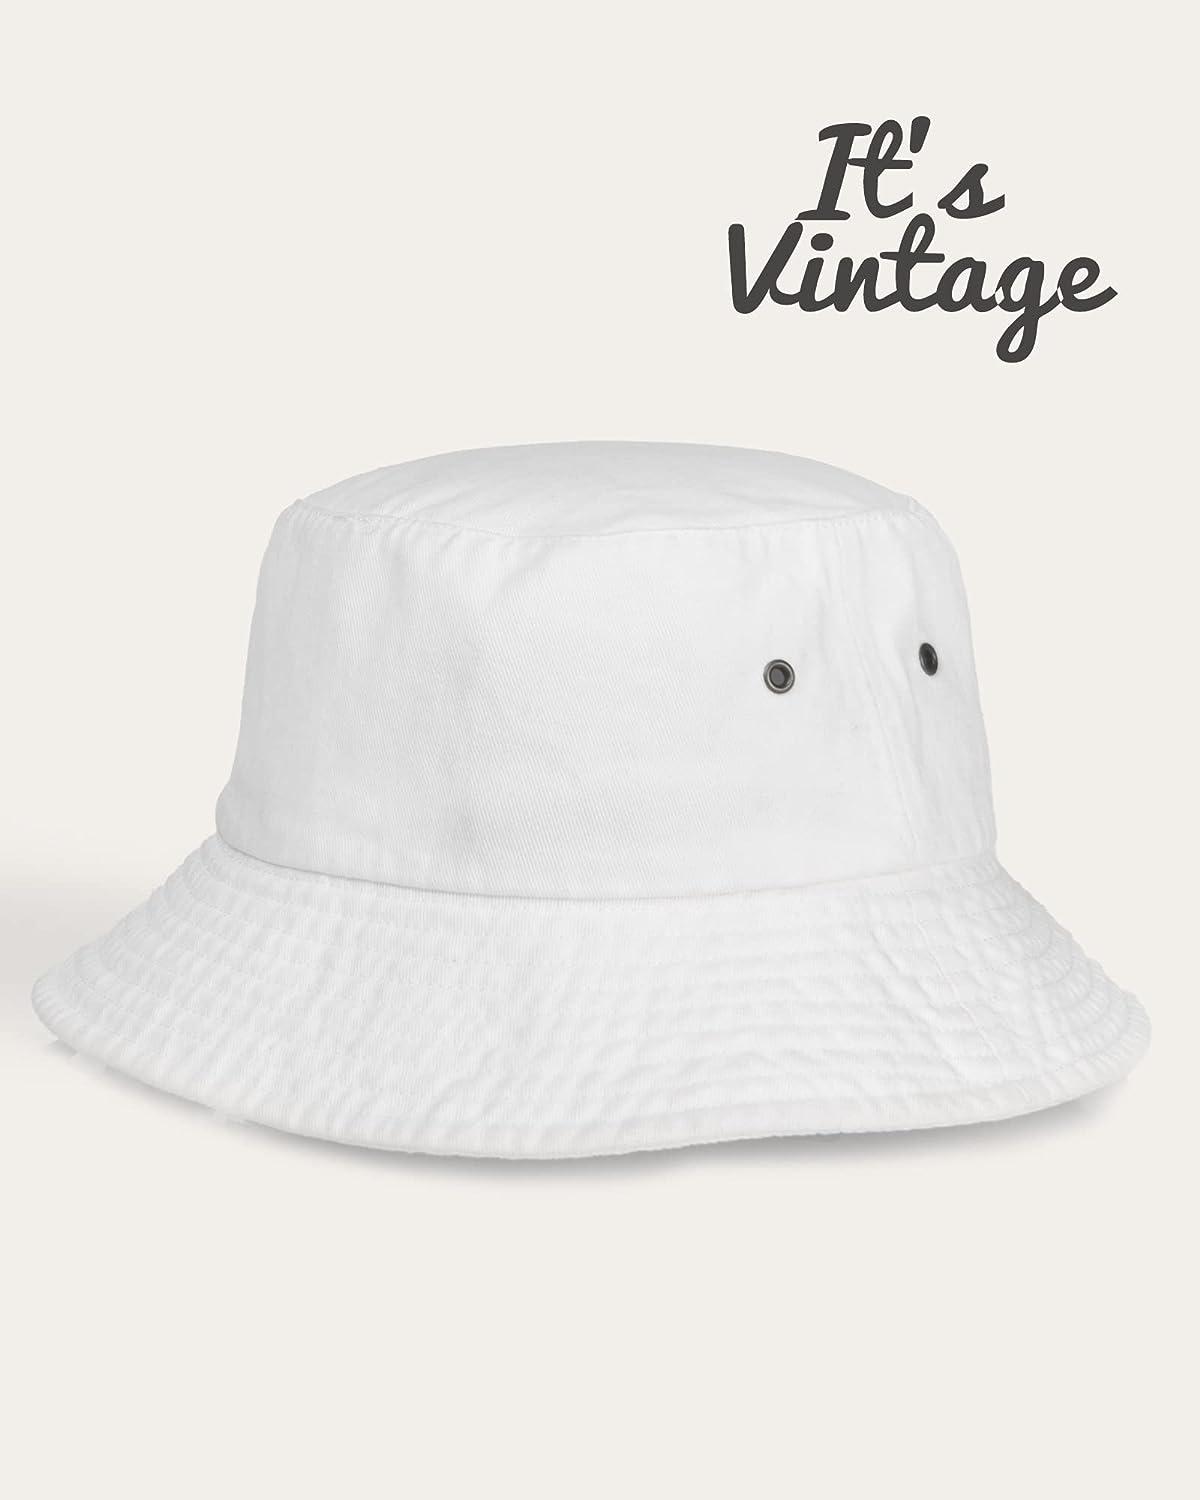 Camptrace Bucket Hats for Women Men Washed Cotton Bucket Hat